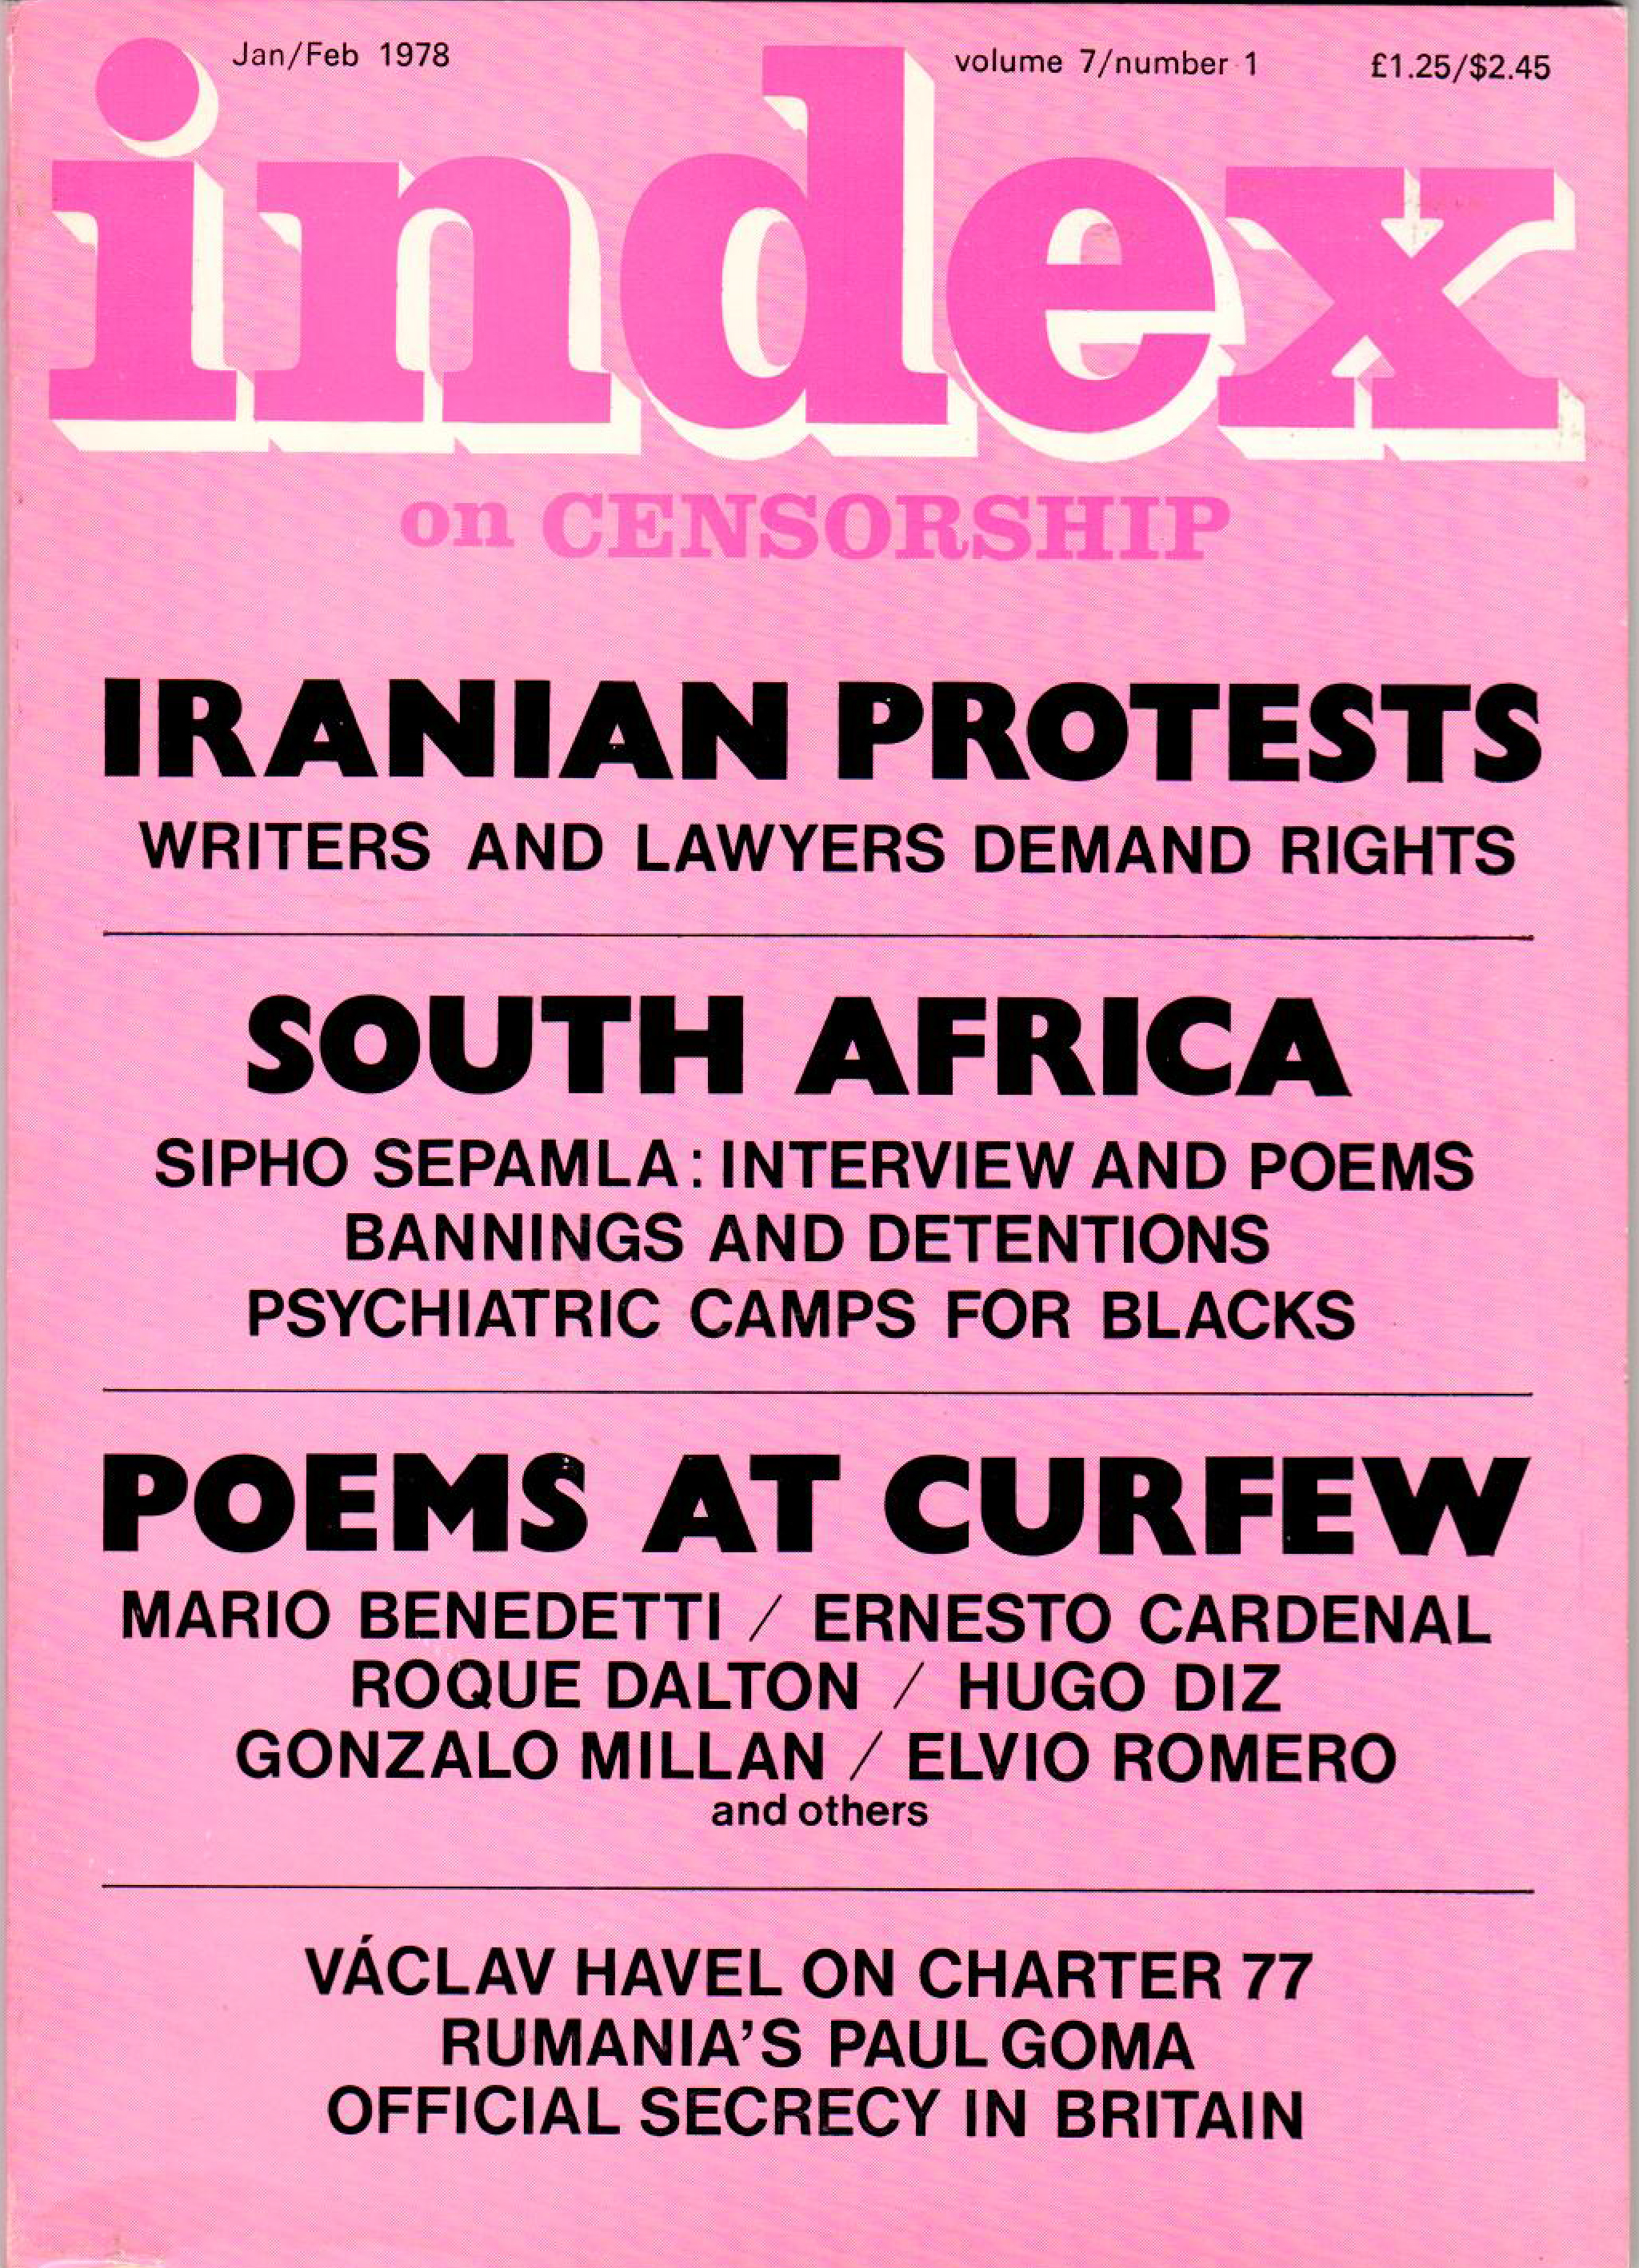 Iranian protests: writers and lawyers demand rights, the January 1978 issue of Index on Censorship magazine